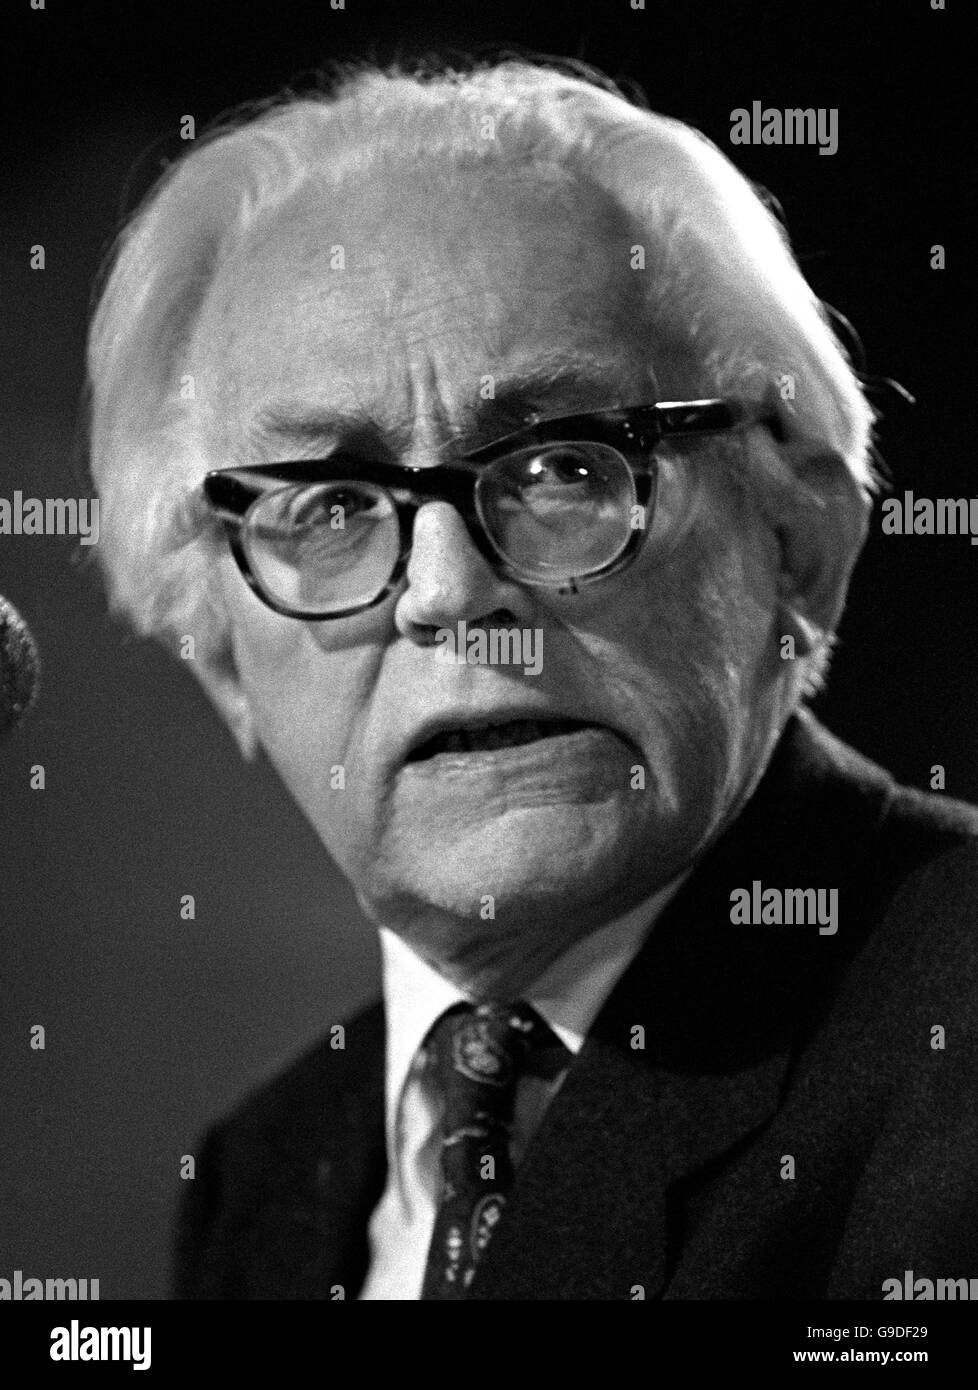 Labour leader Michael Foot in action on the platform. Born in 1913, he first contested a seat for the Labour Party in 1935. Stock Photo